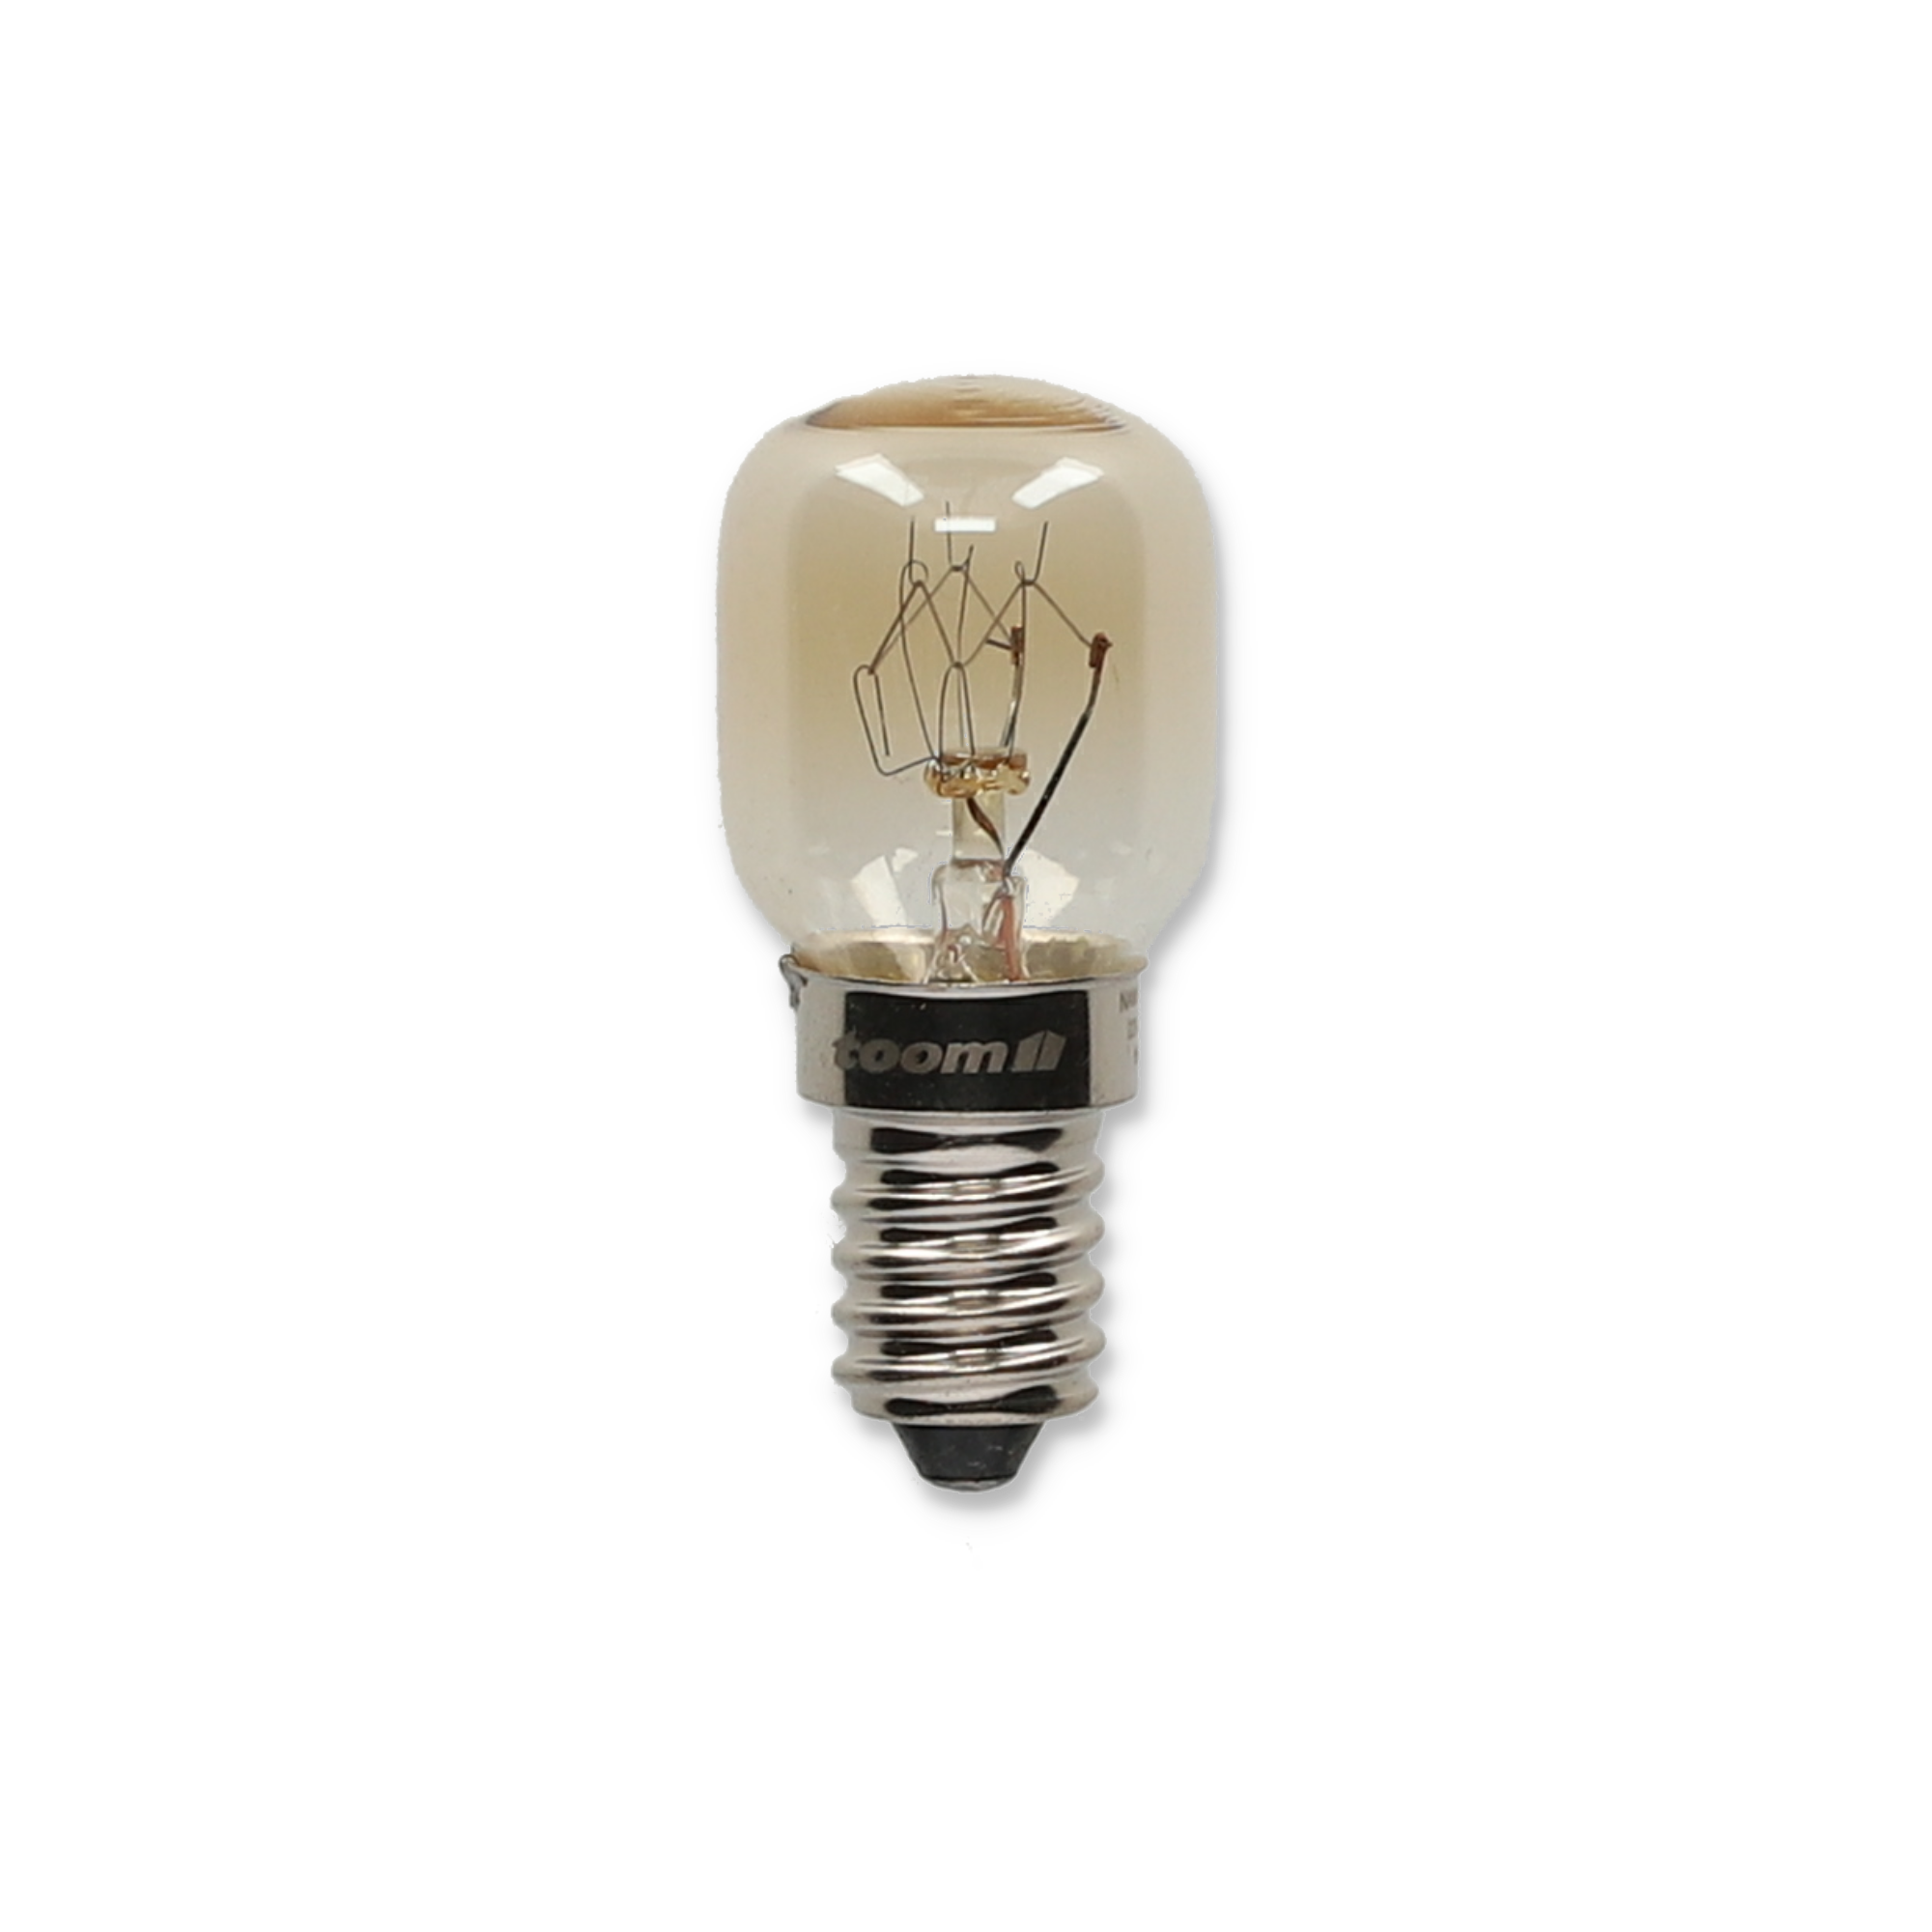 Backofenlampe E14 25 W 110 lm + product picture